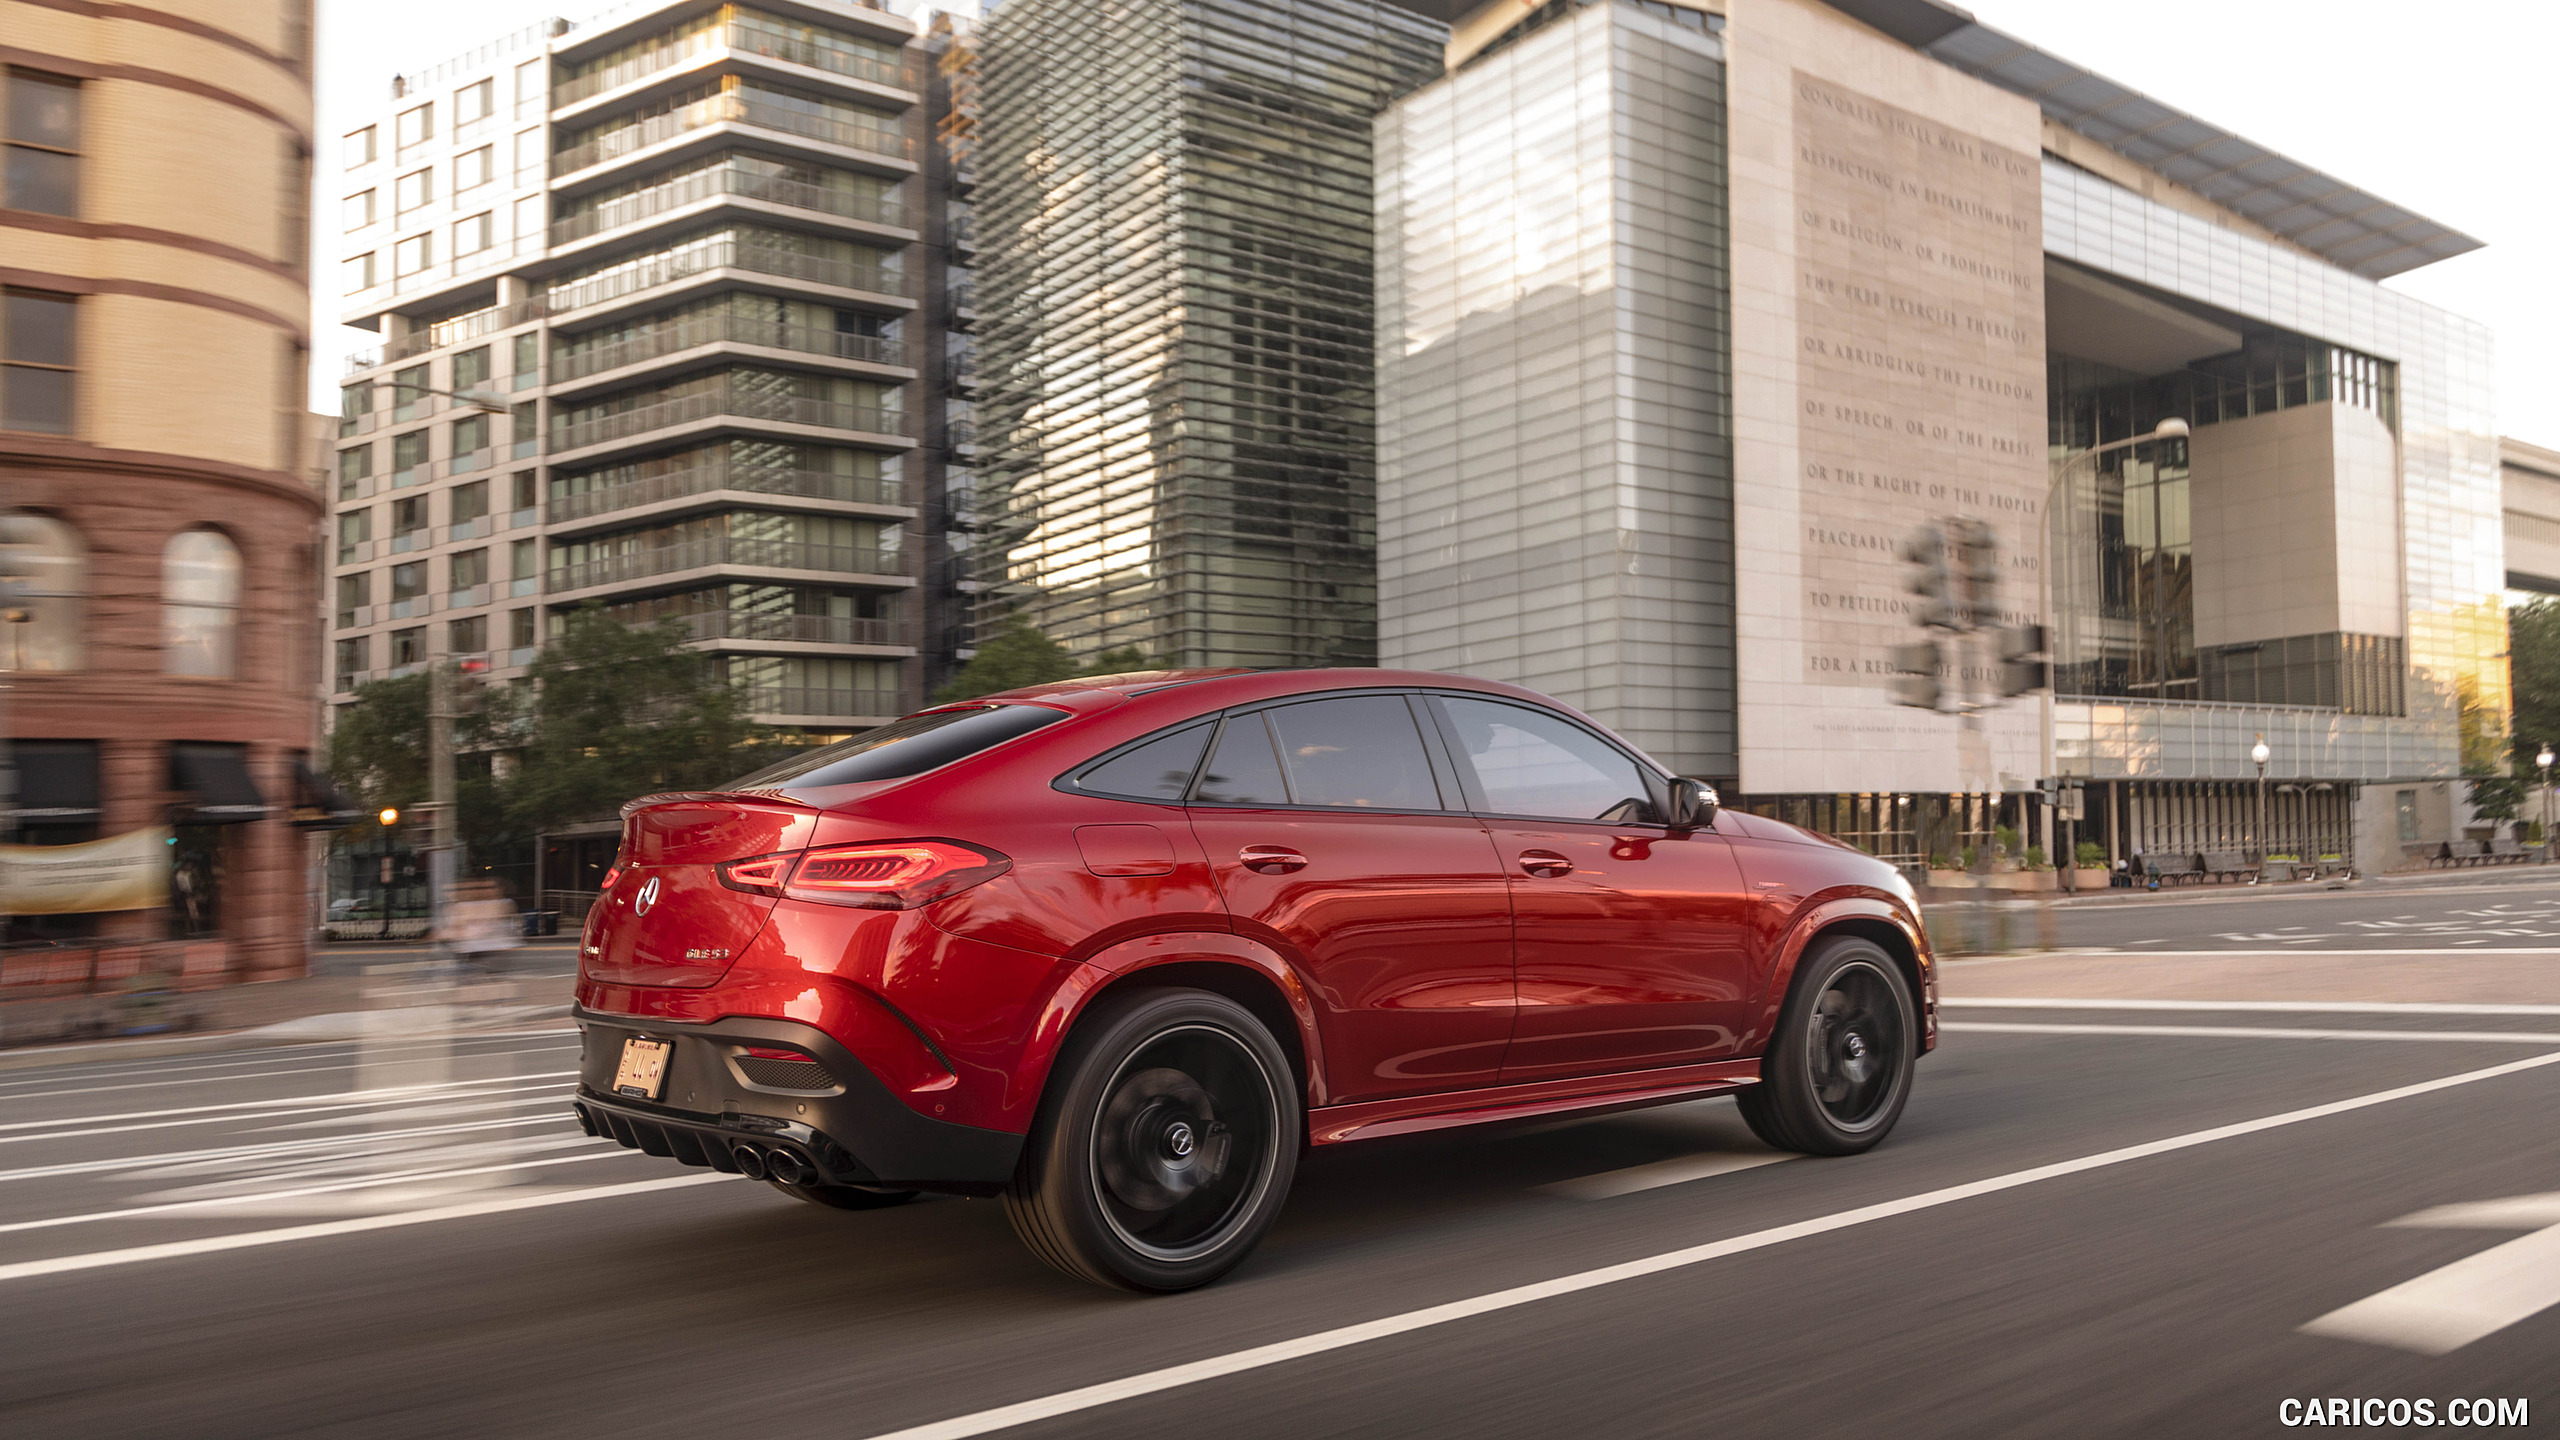 2021 Mercedes-AMG GLE 53 Coupe - Rear Three-Quarter, #124 of 178